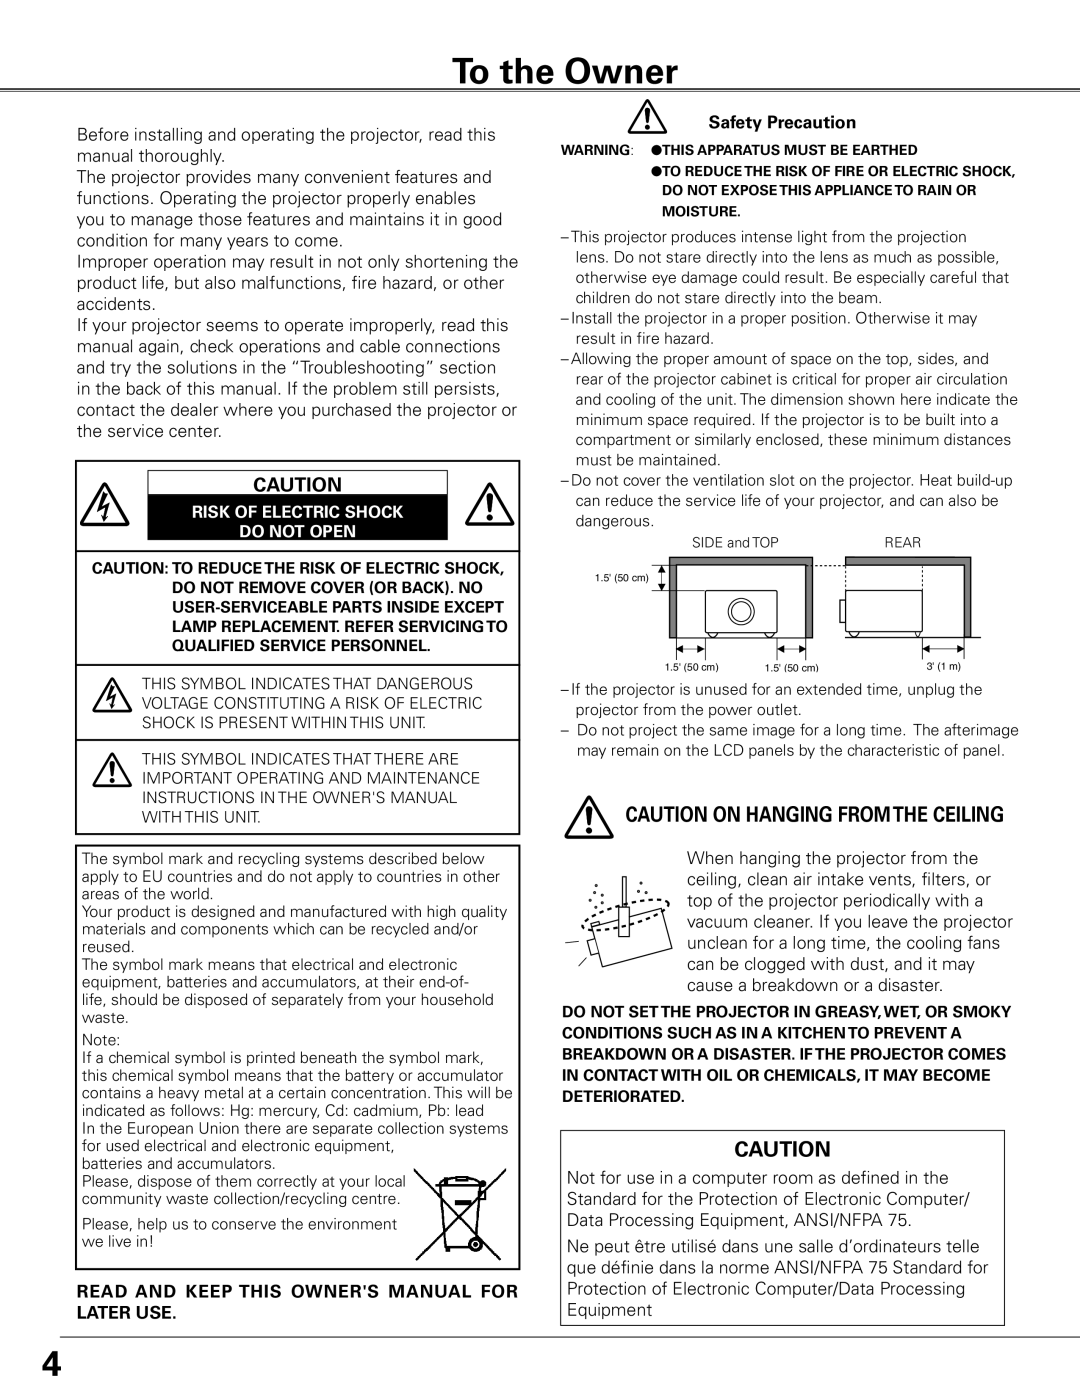 Sanyo WTC500L owner manual To the Owner, Caution On Hanging From The Ceiling, Risk Of Electric Shock Do Not Open 